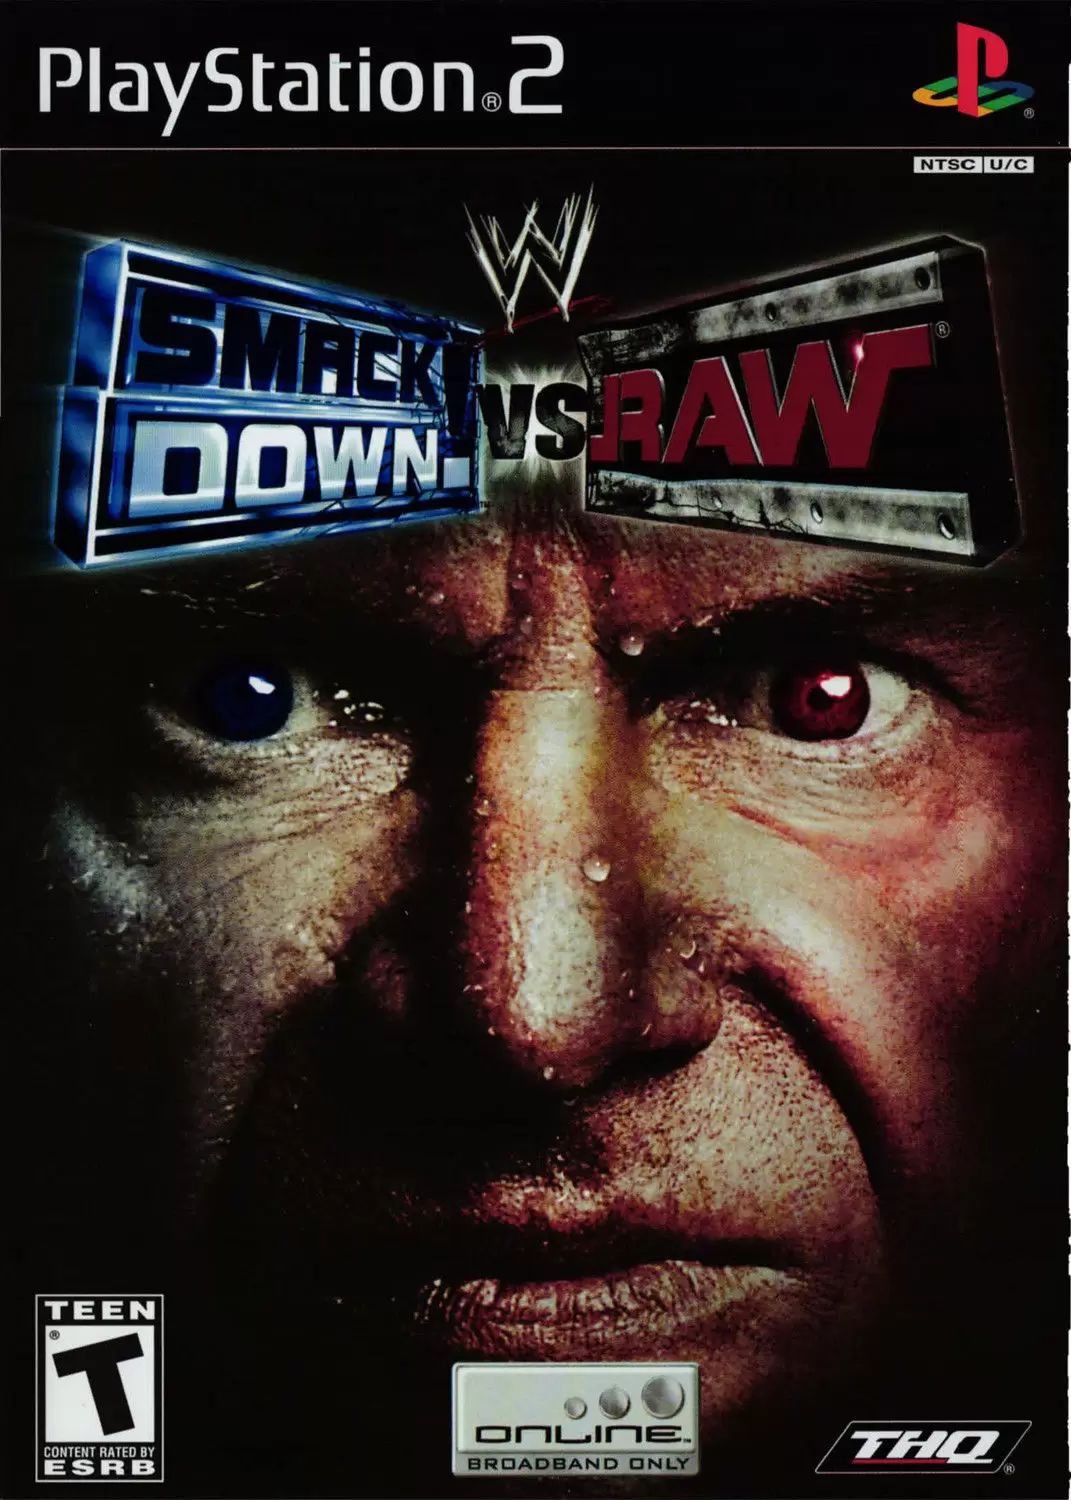 PS2 Games - WWE SmackDown! vs. Raw